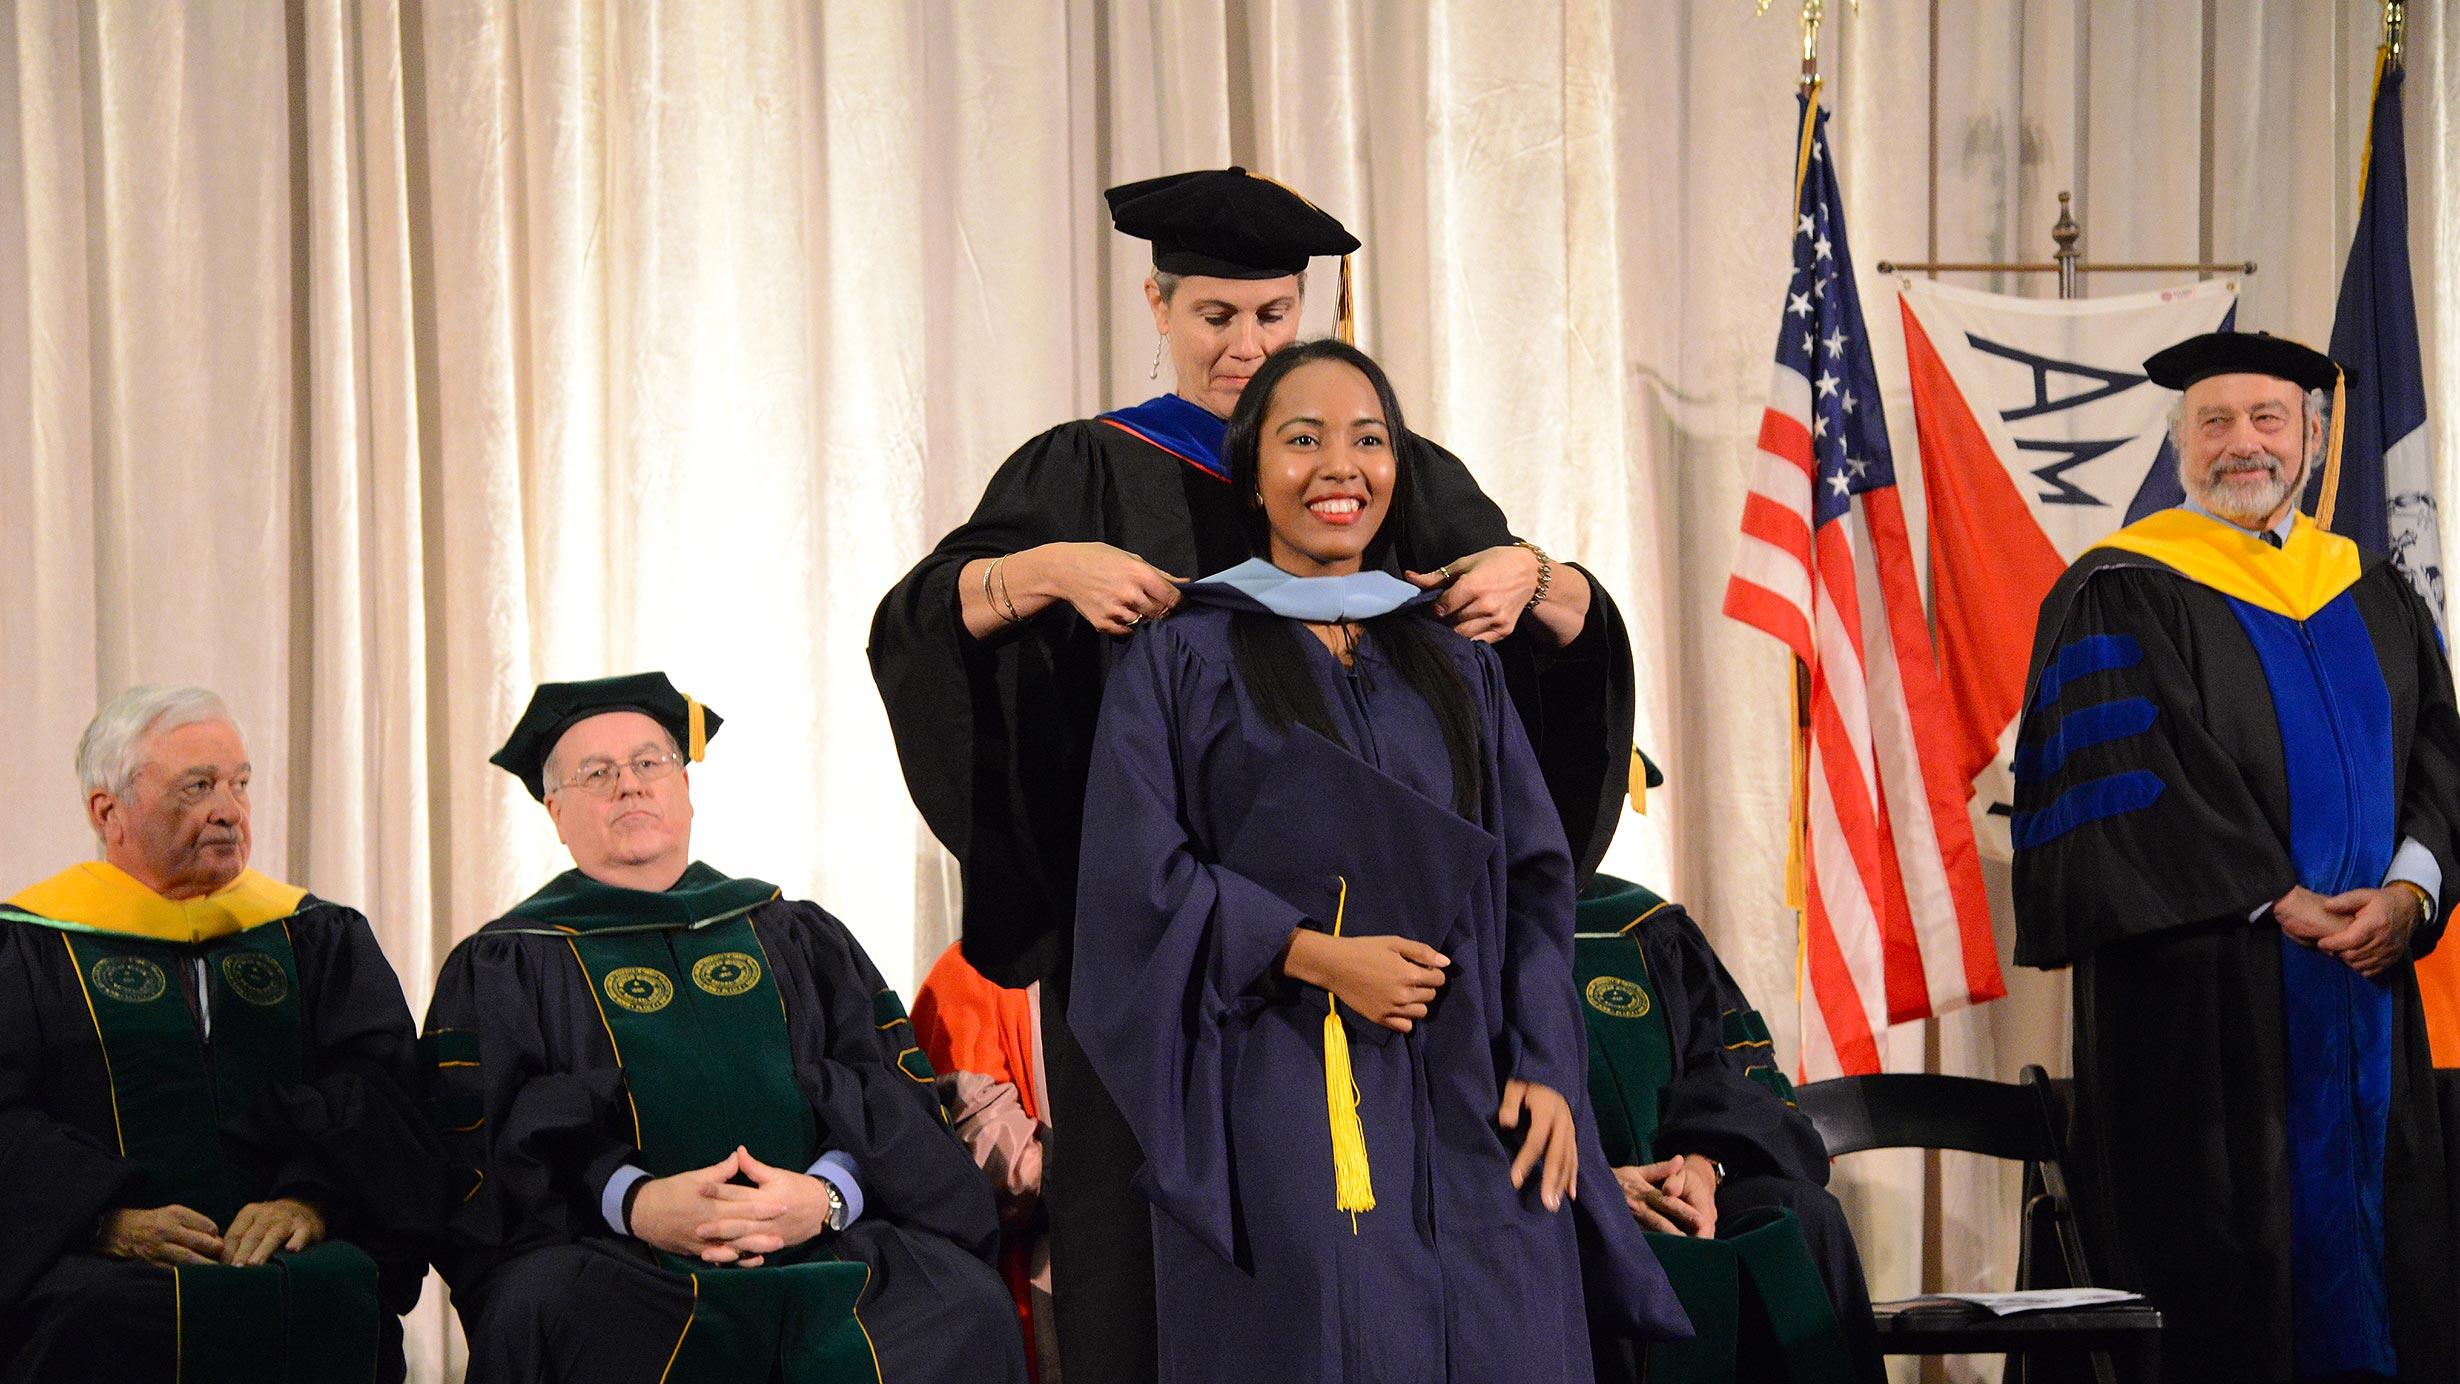 An MAT graduate is awarded a sash during the graduation ceremony, as other faculty members look on.